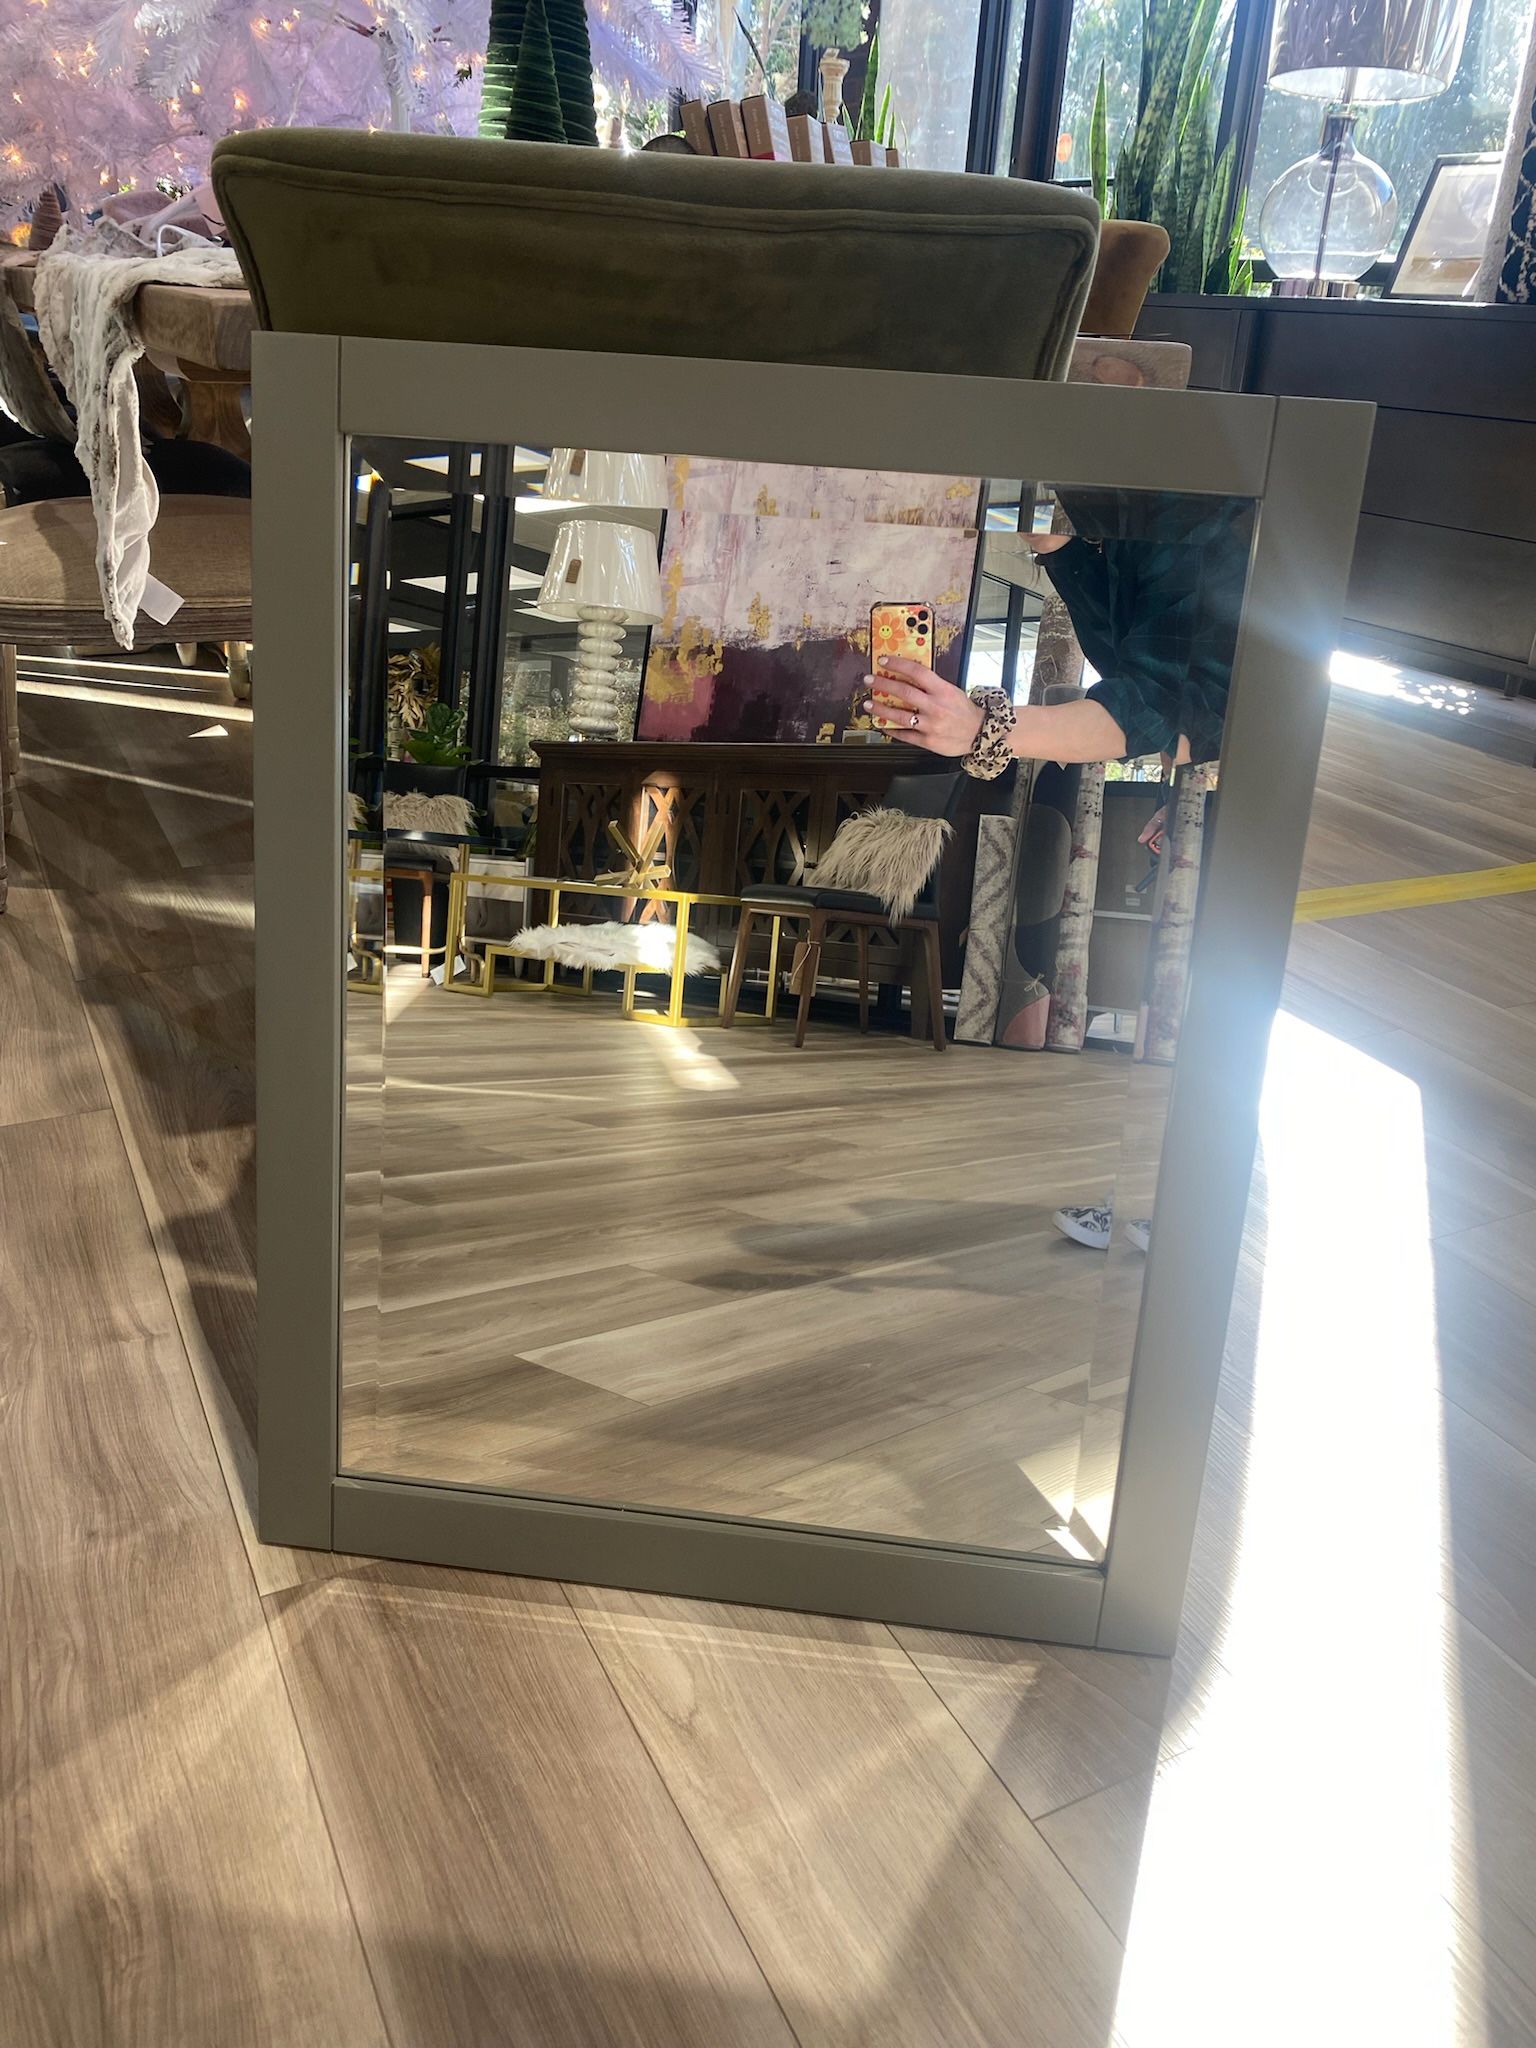 {ONE} Afanasie rectangle wood wall mirror. Has slight wear on backing (see photo) - 30” H x 24” W x 0.75” D. Color: gray. MSRP: $176. Our price: $104 